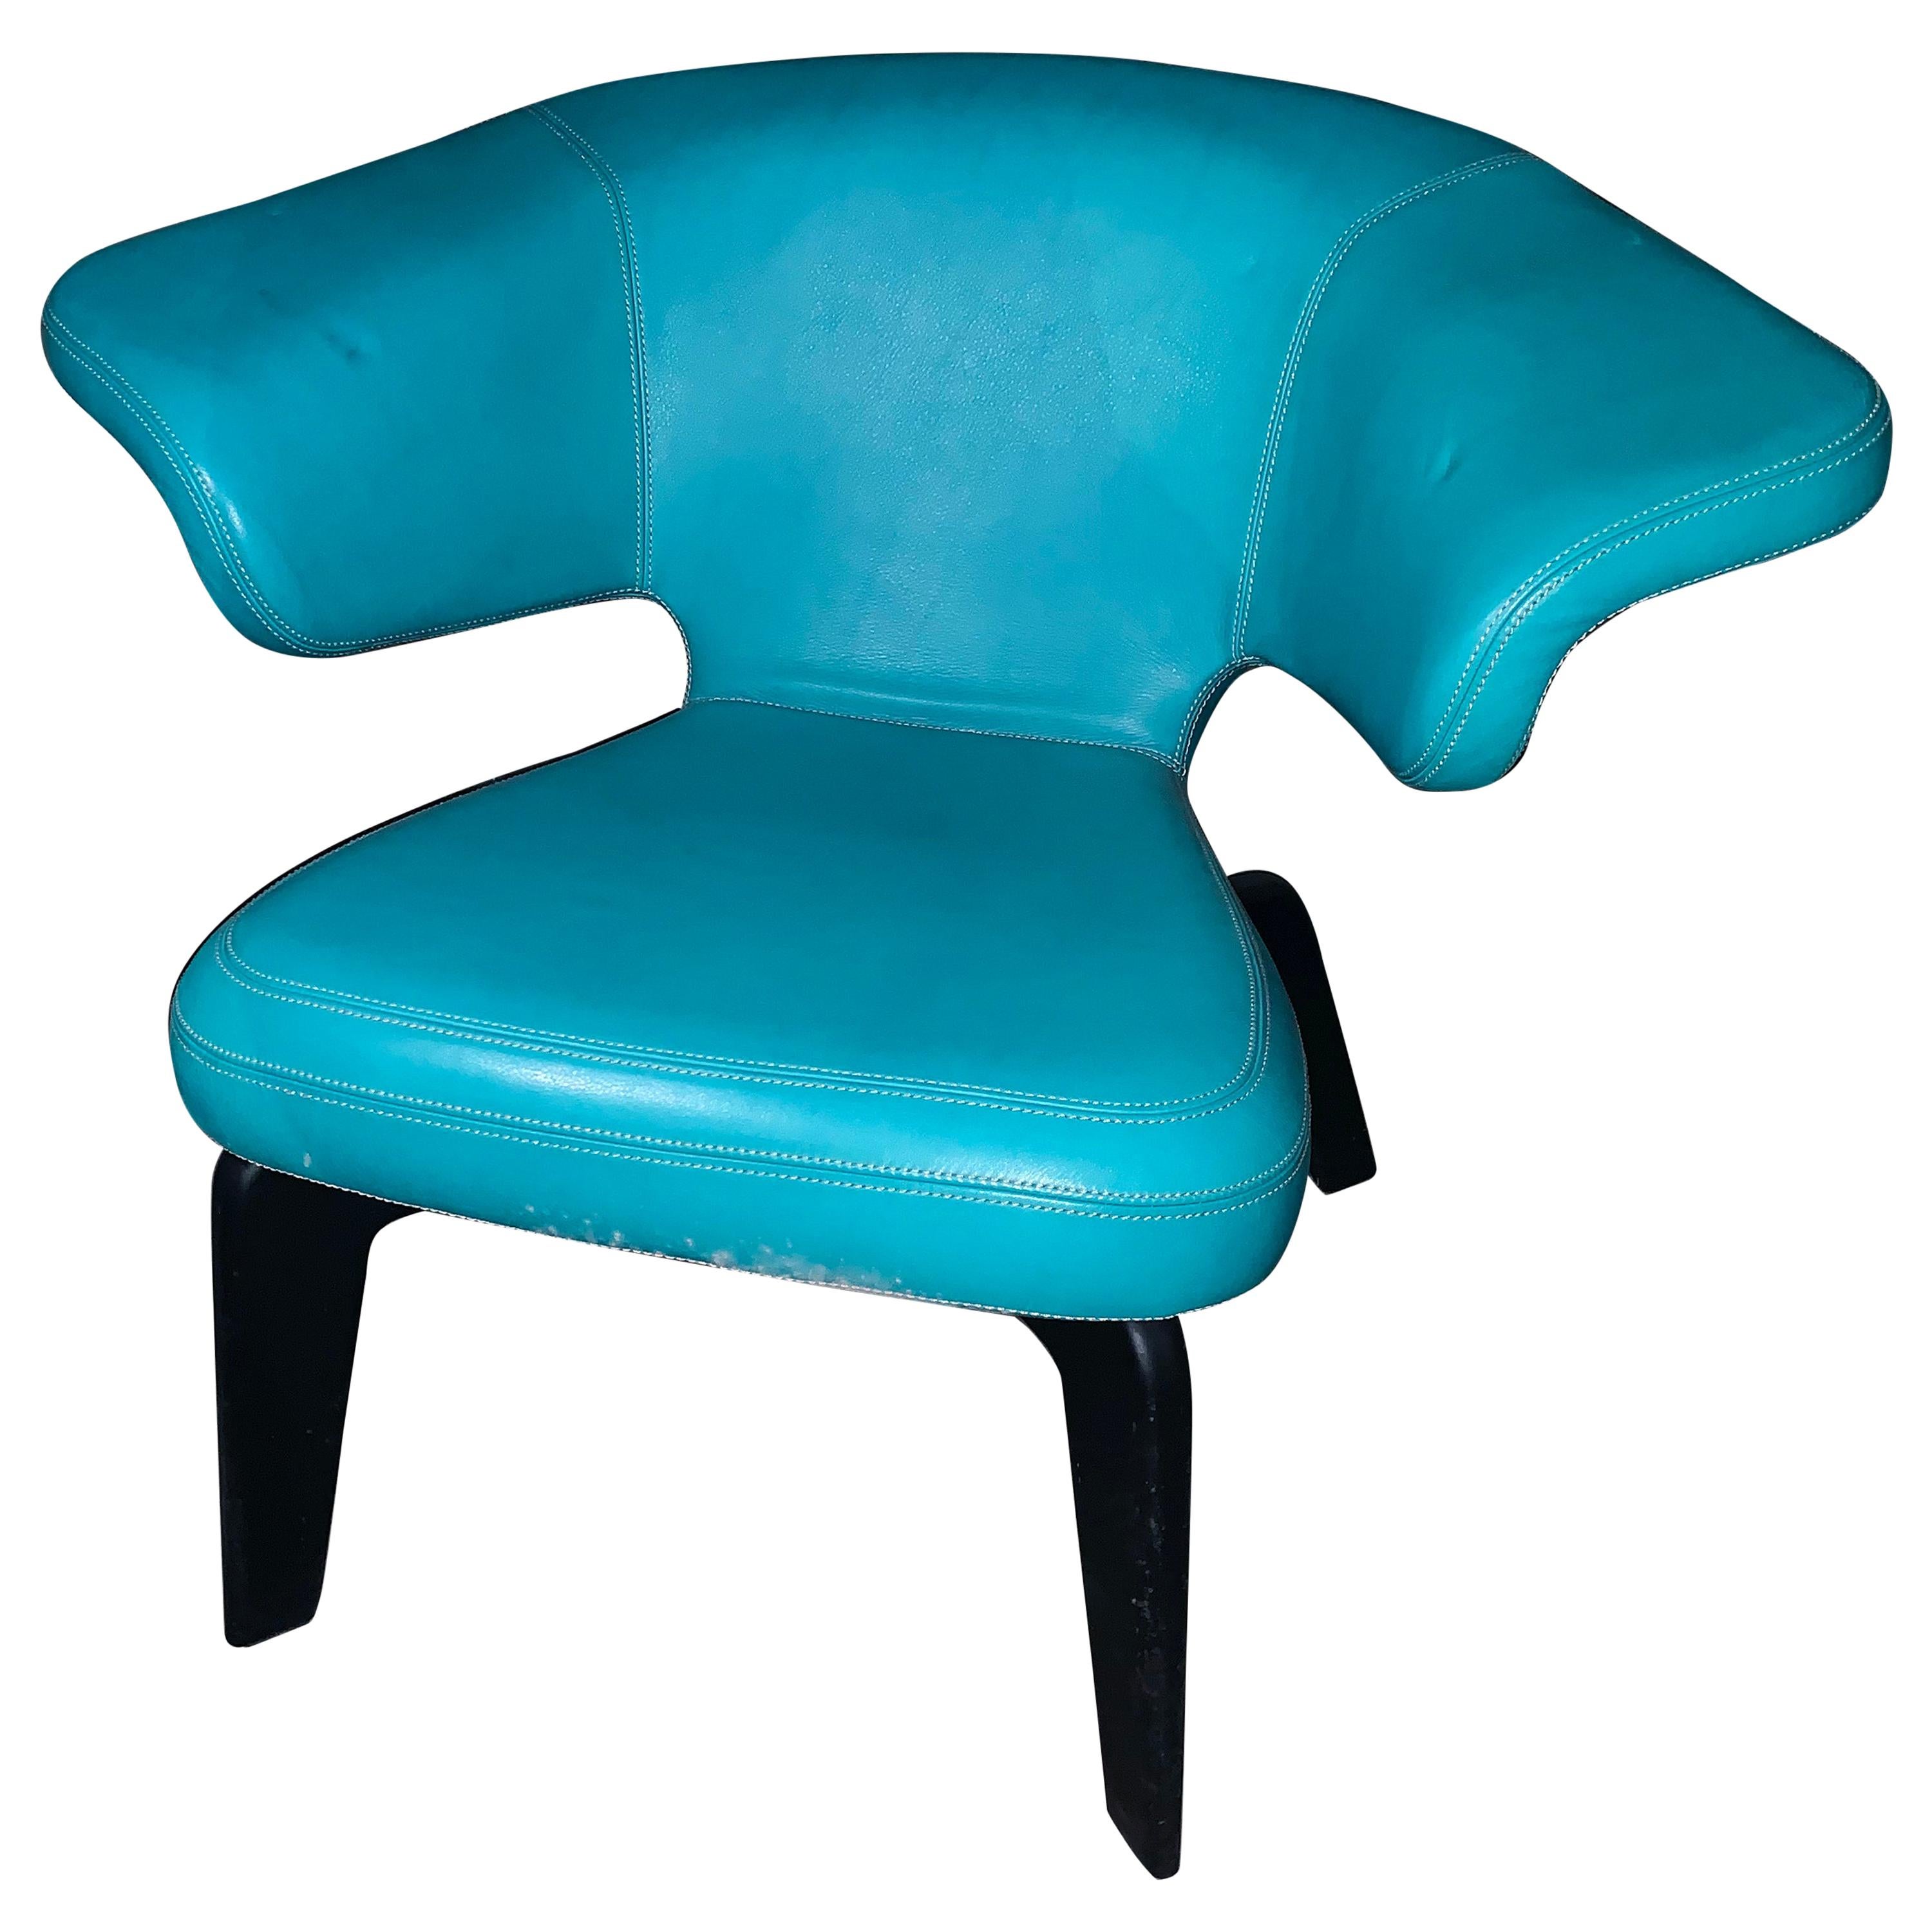 ClassiCon Turquoise Munich Lounge Chair Designed by Sauerbruch Hutton in STOCK For Sale